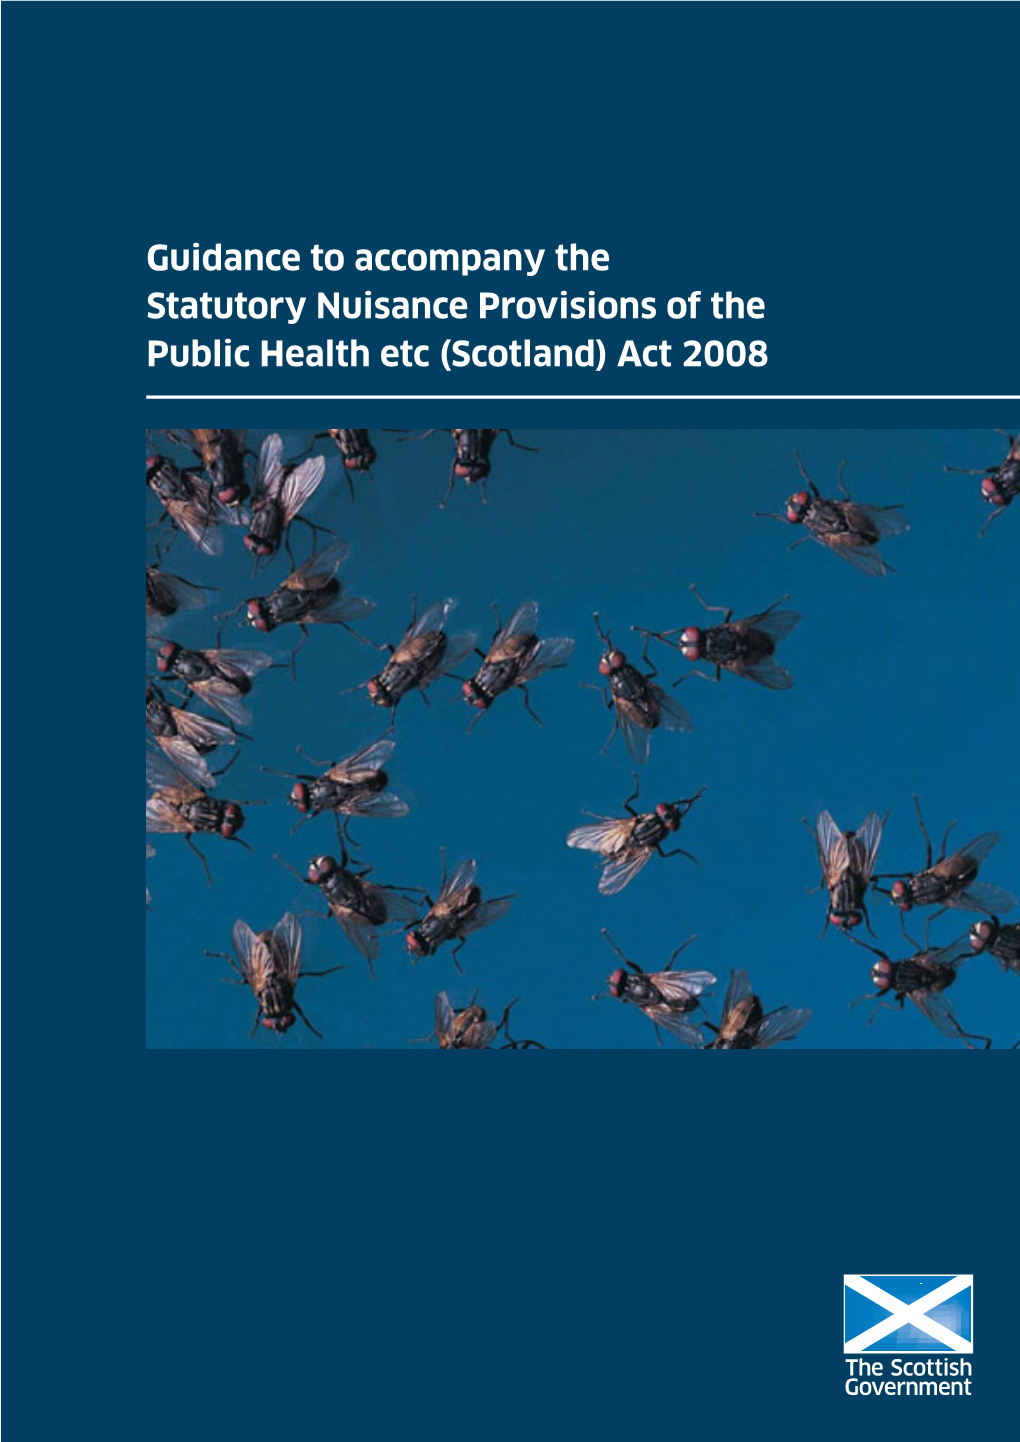 Nuisance Provisions of the Public Health Etc (Scotland) Act 2008 Guidance to Accompany the Statutory Nuisance Provisions of the Public Health Etc (Scotland) Act 2008